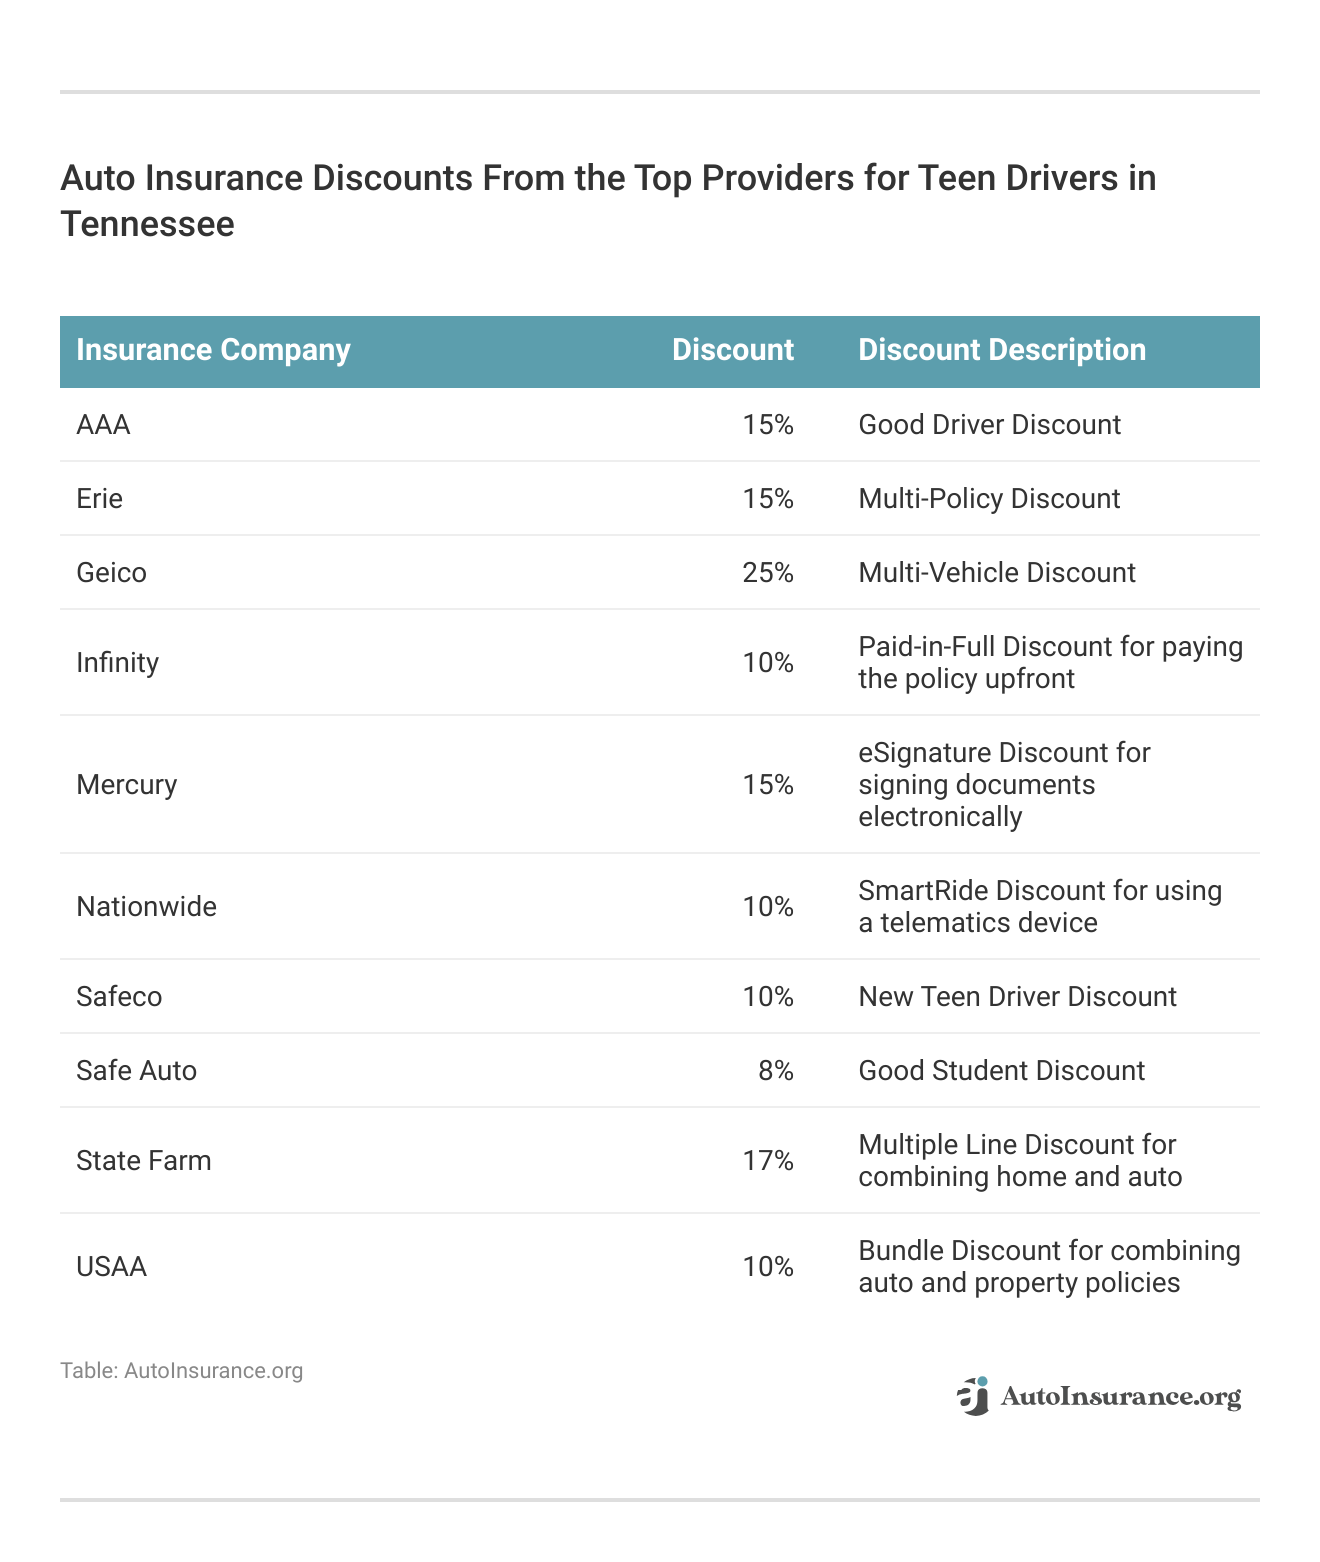 <h3>Auto Insurance Discounts From the Top Providers for Teen Drivers in Tennessee</h3>